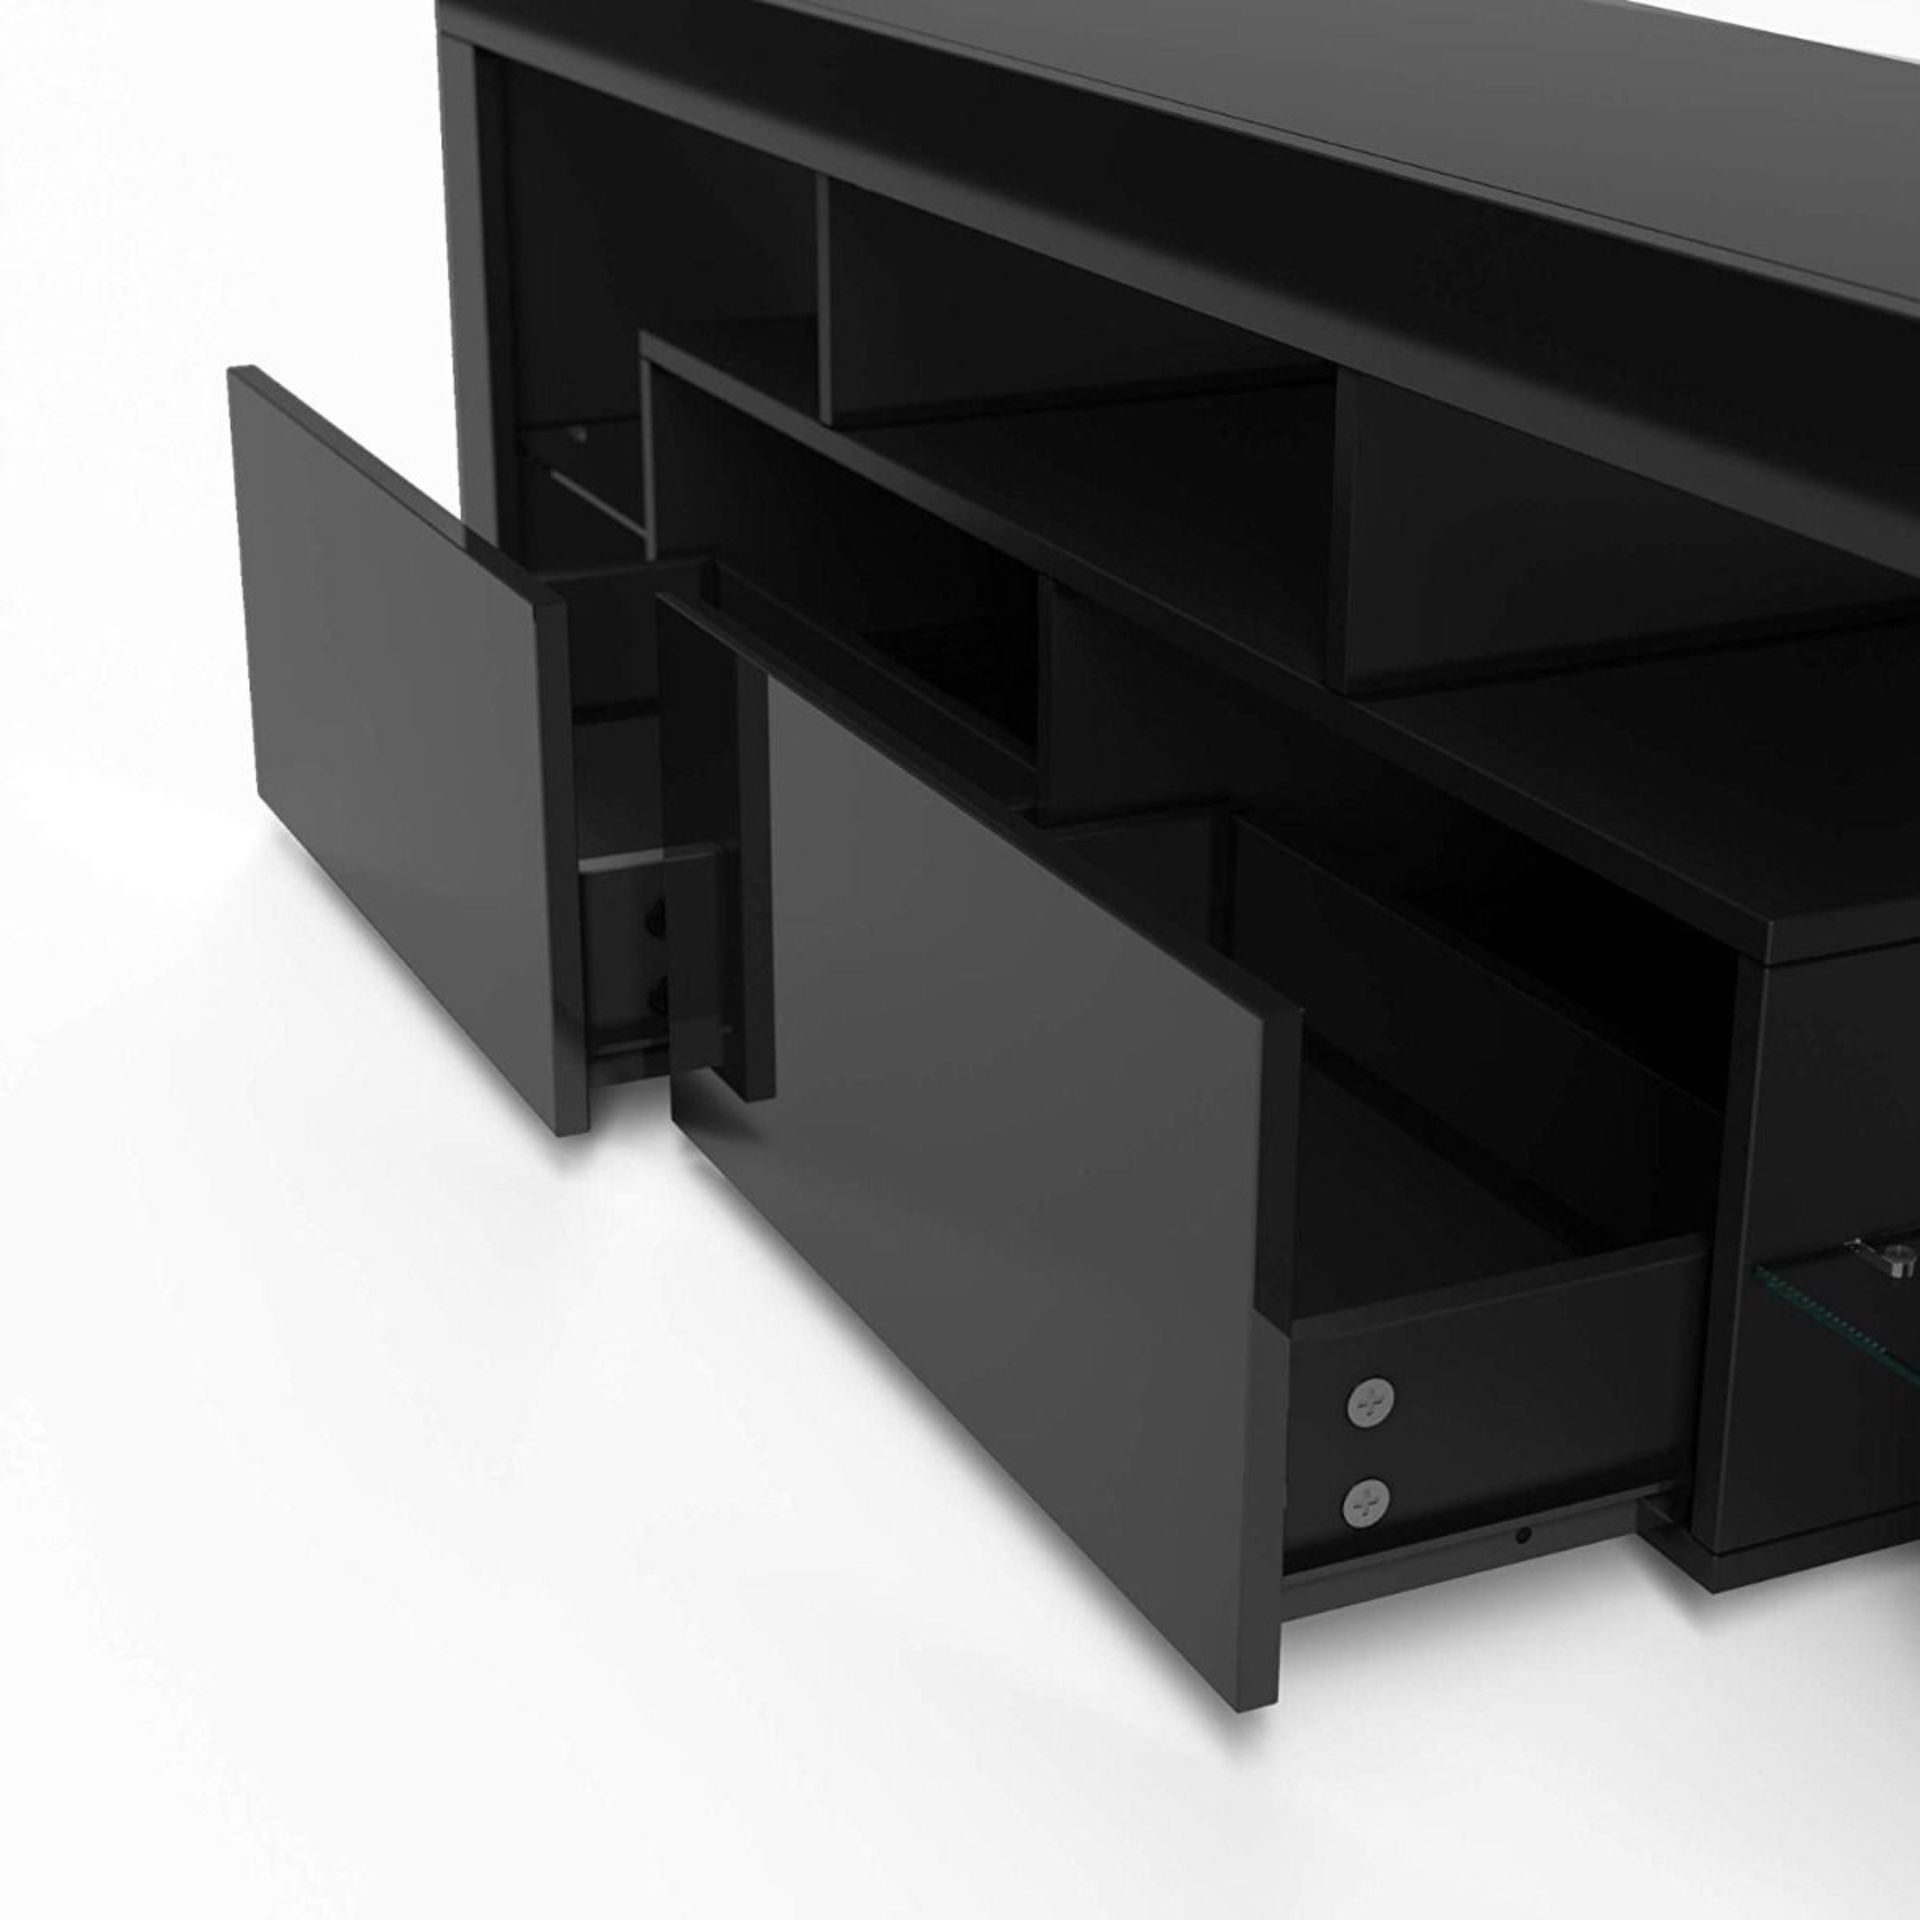 MODERN 160CM TV UNIT CABINET TV STAND HIGH GLOSS DOORS WITH LED LIGHTS - Image 3 of 3